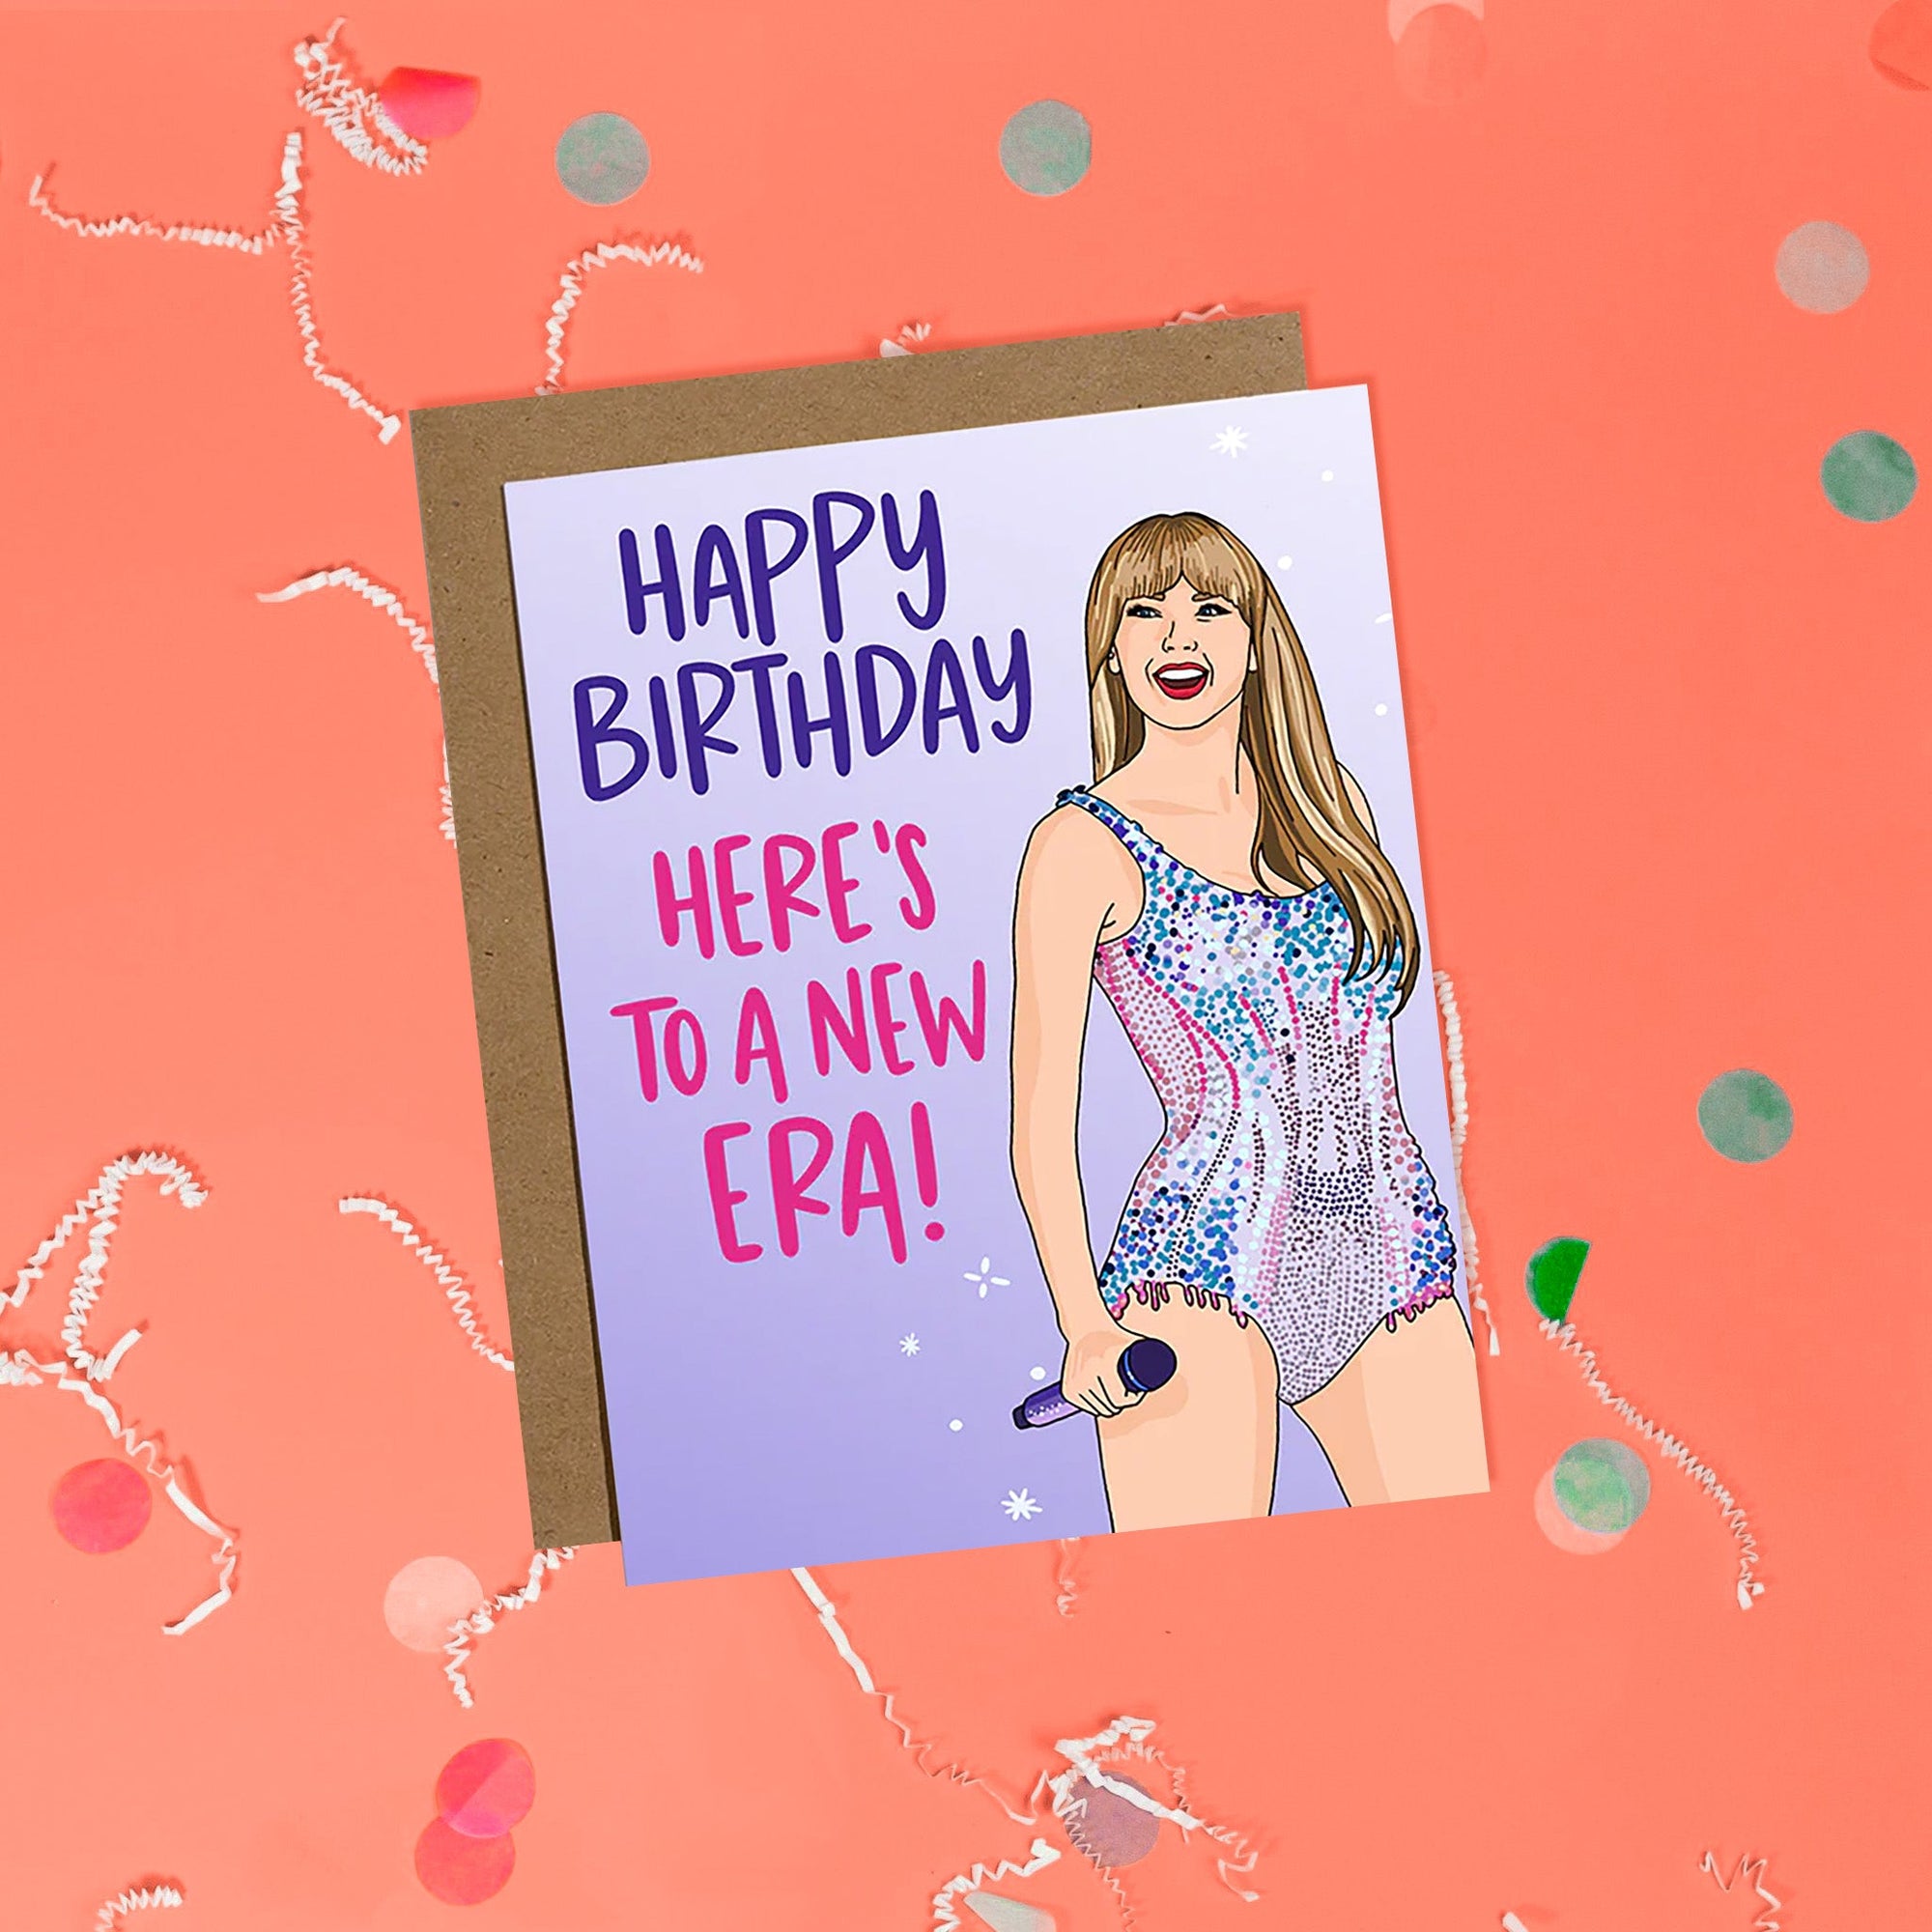 On a coral pink background sits a card with white crinkle and big, colorful confetti scattered around. This Taylor Swift inspired card has different shades of lavender. There is an illustration of Taylor Swift and it says "HAPPY BIRTHDAY HERE'S TO A NEW ERA!" in purple and pink lettering. It has a kraft envelope.